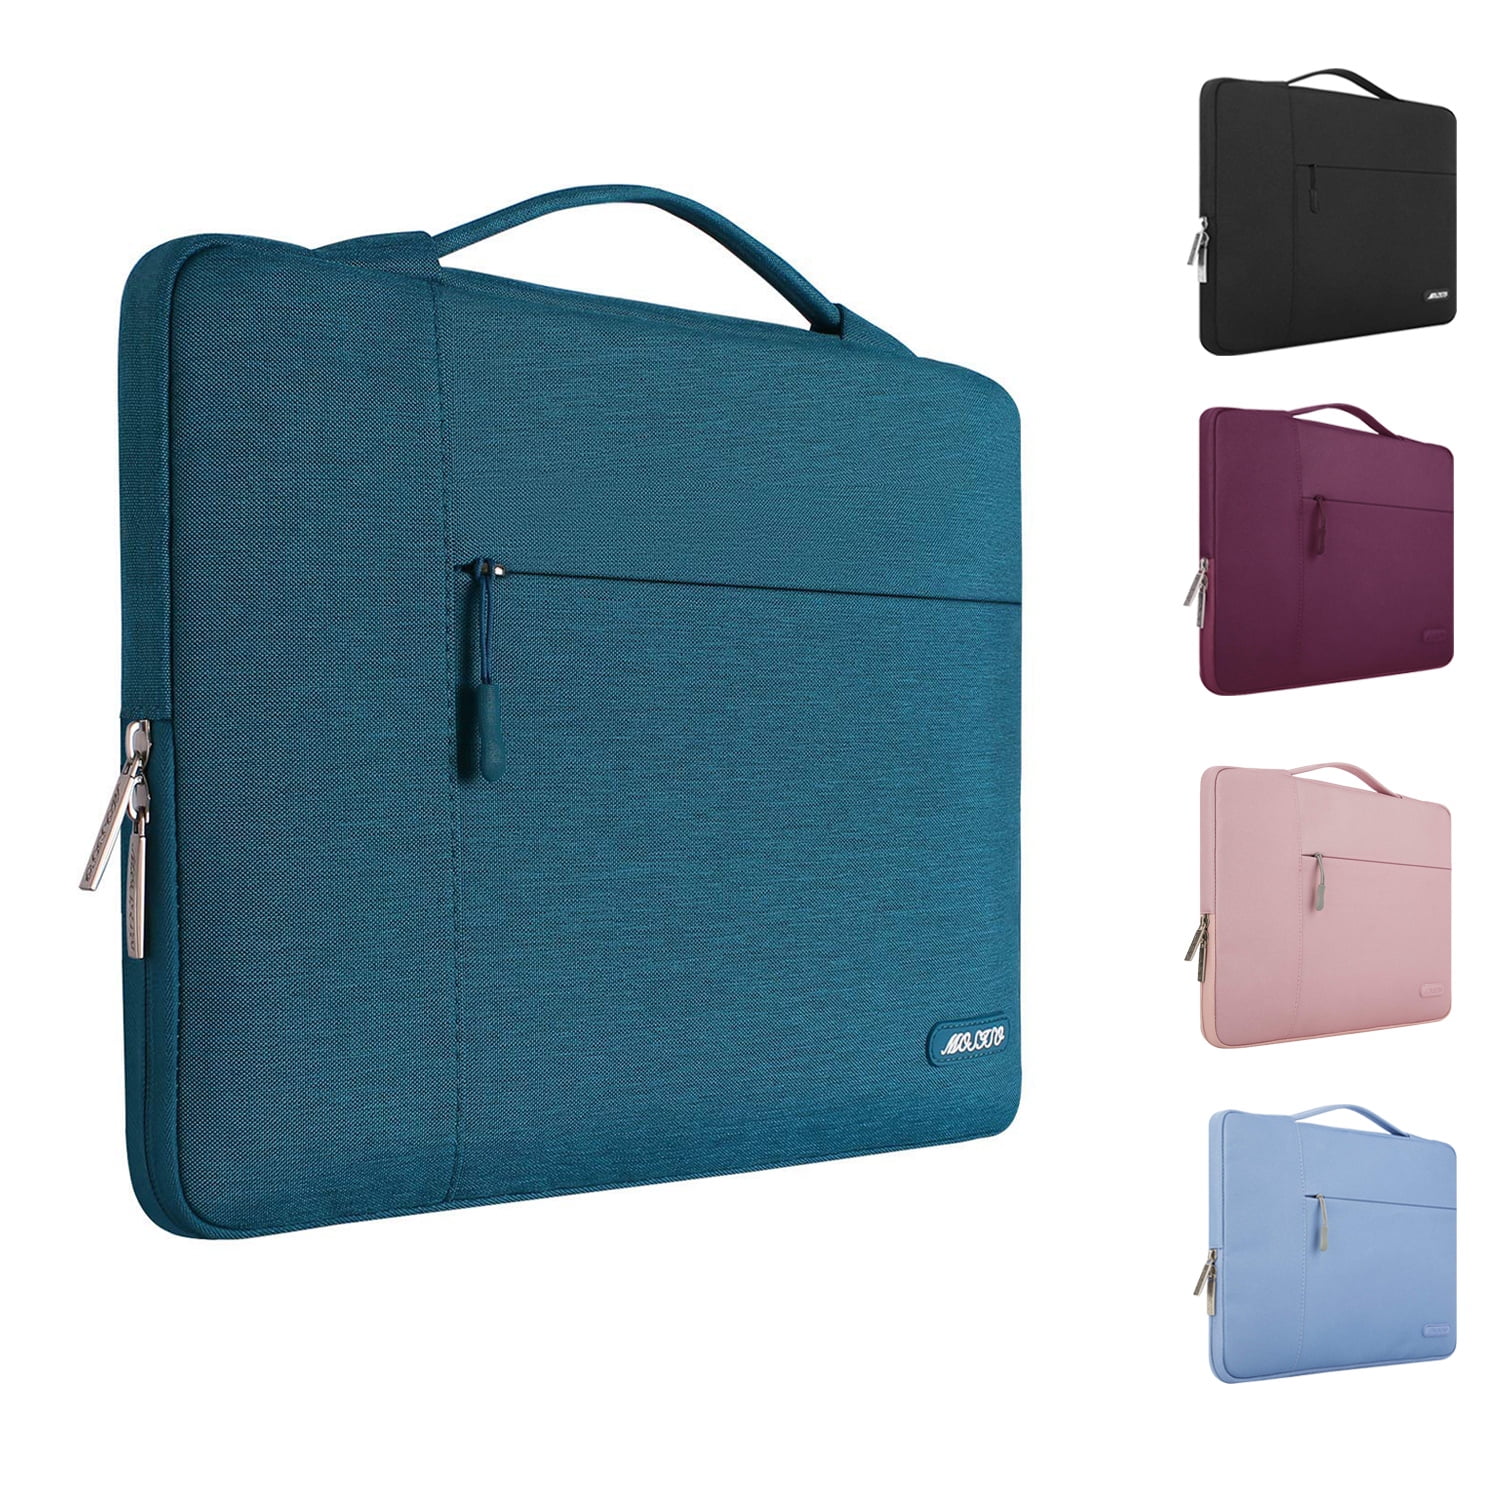 Ultrabook Netbook Tablet Carring Case Navy Blue MOSISO Polyester Fabric Sleeve Cover Laptop Shoulder Briefcase Bag Compatible with 13-13.3 Inch MacBook Air MacBook Pro